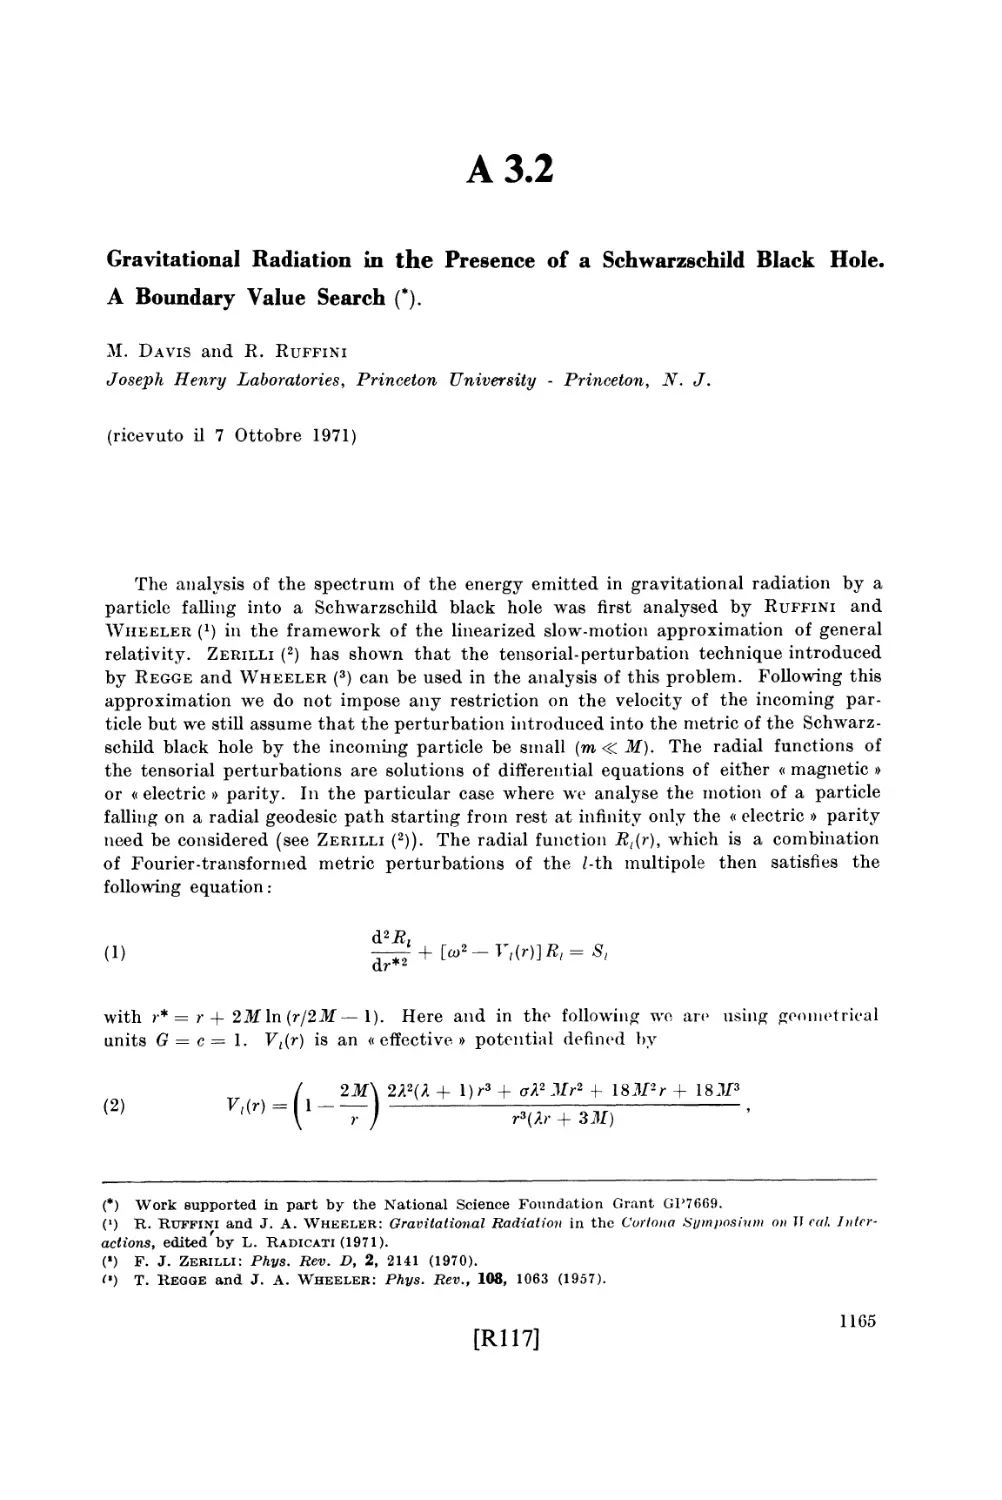 Appendix 3.2 Gravitational Radiation in the Presence of a Schwarzschild Black Hole. A Boundary Value Search / M. Davis and R. Ruffini